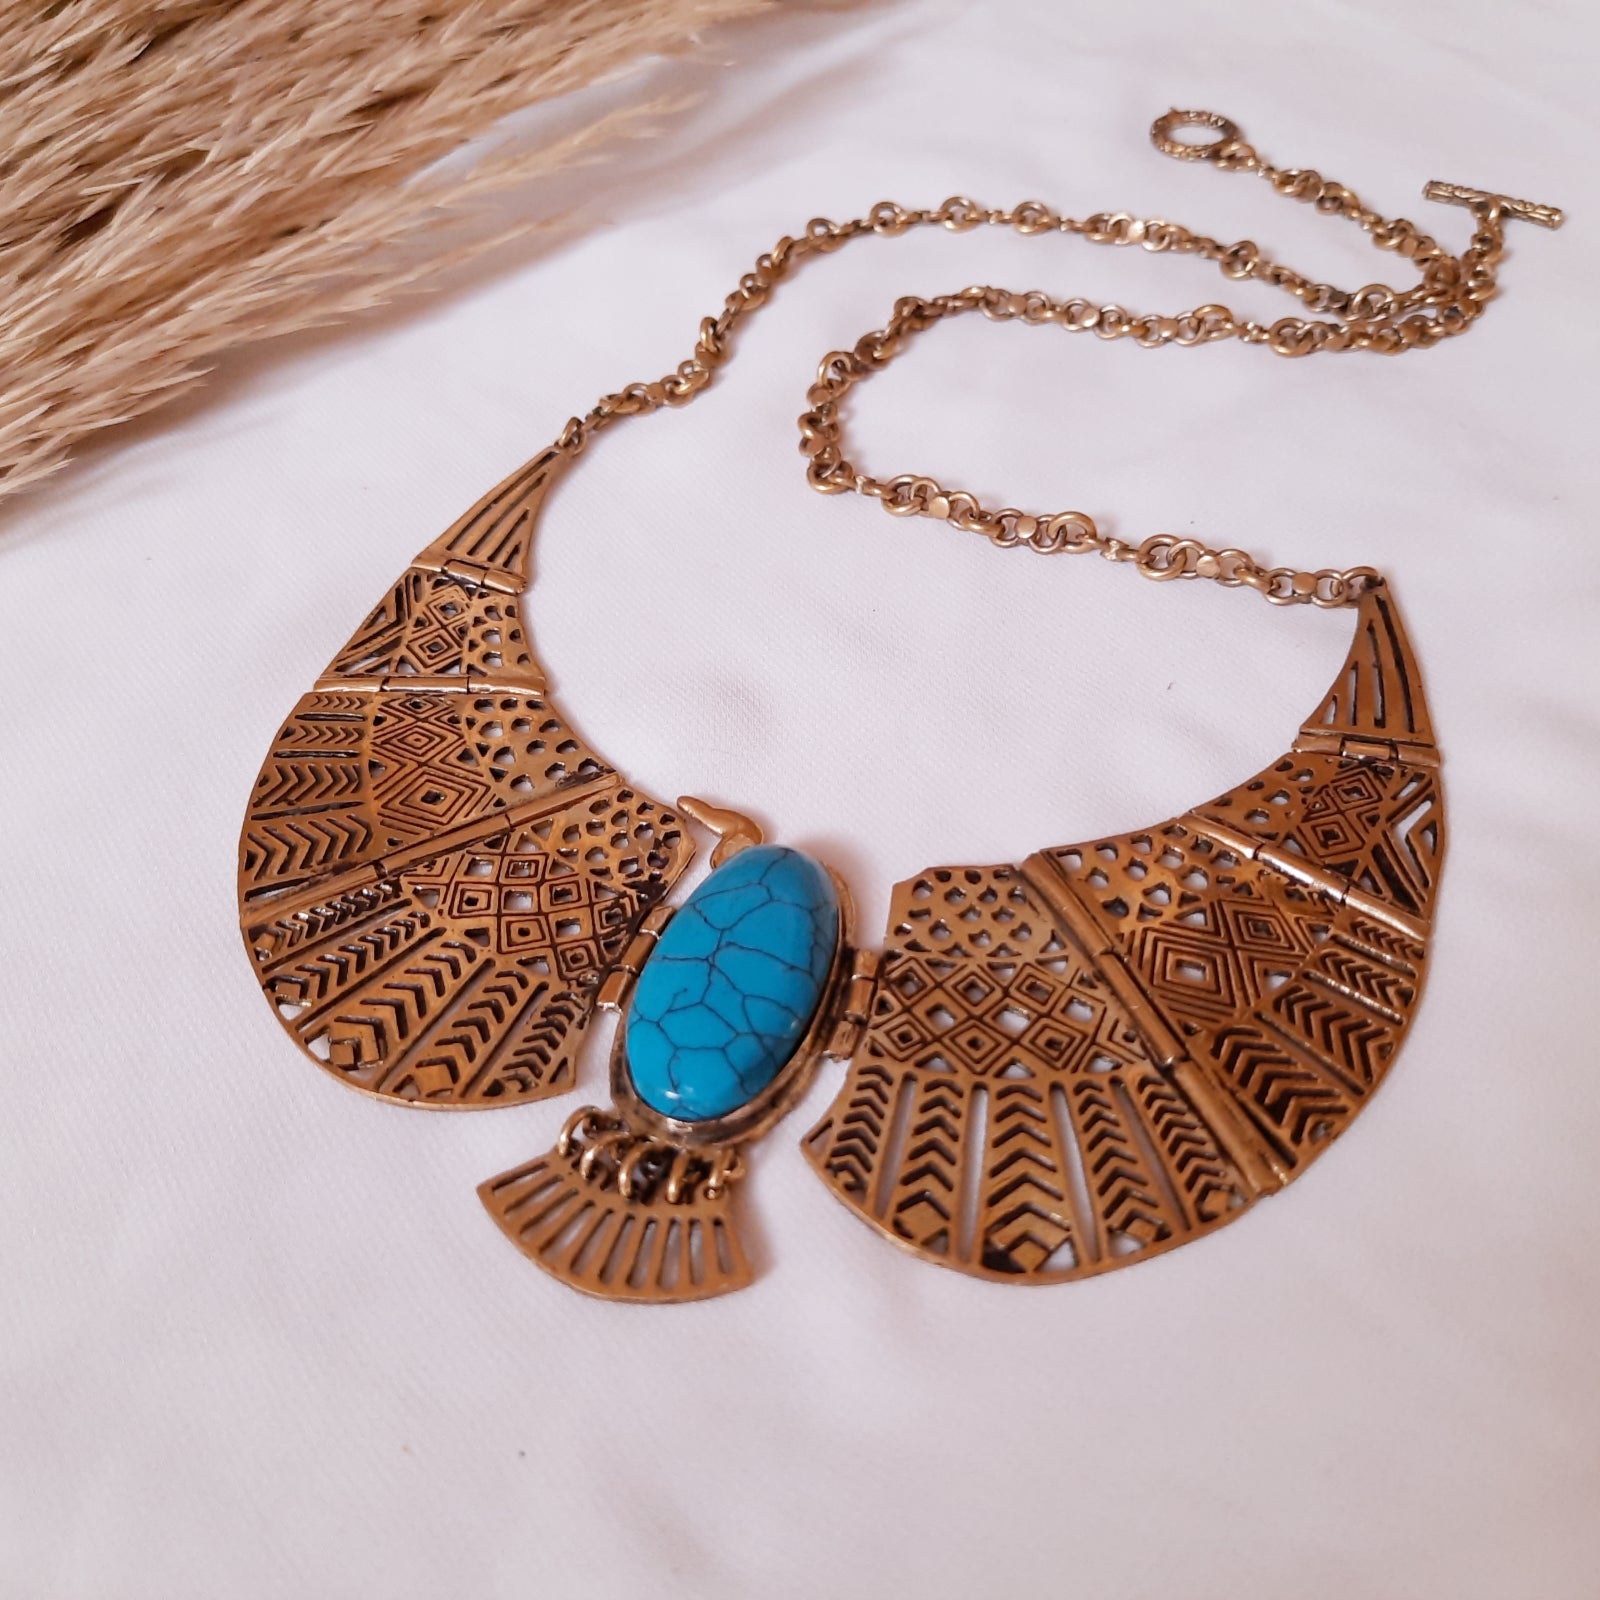 Cleopatra Necklace - Pure Copper and Turquoise